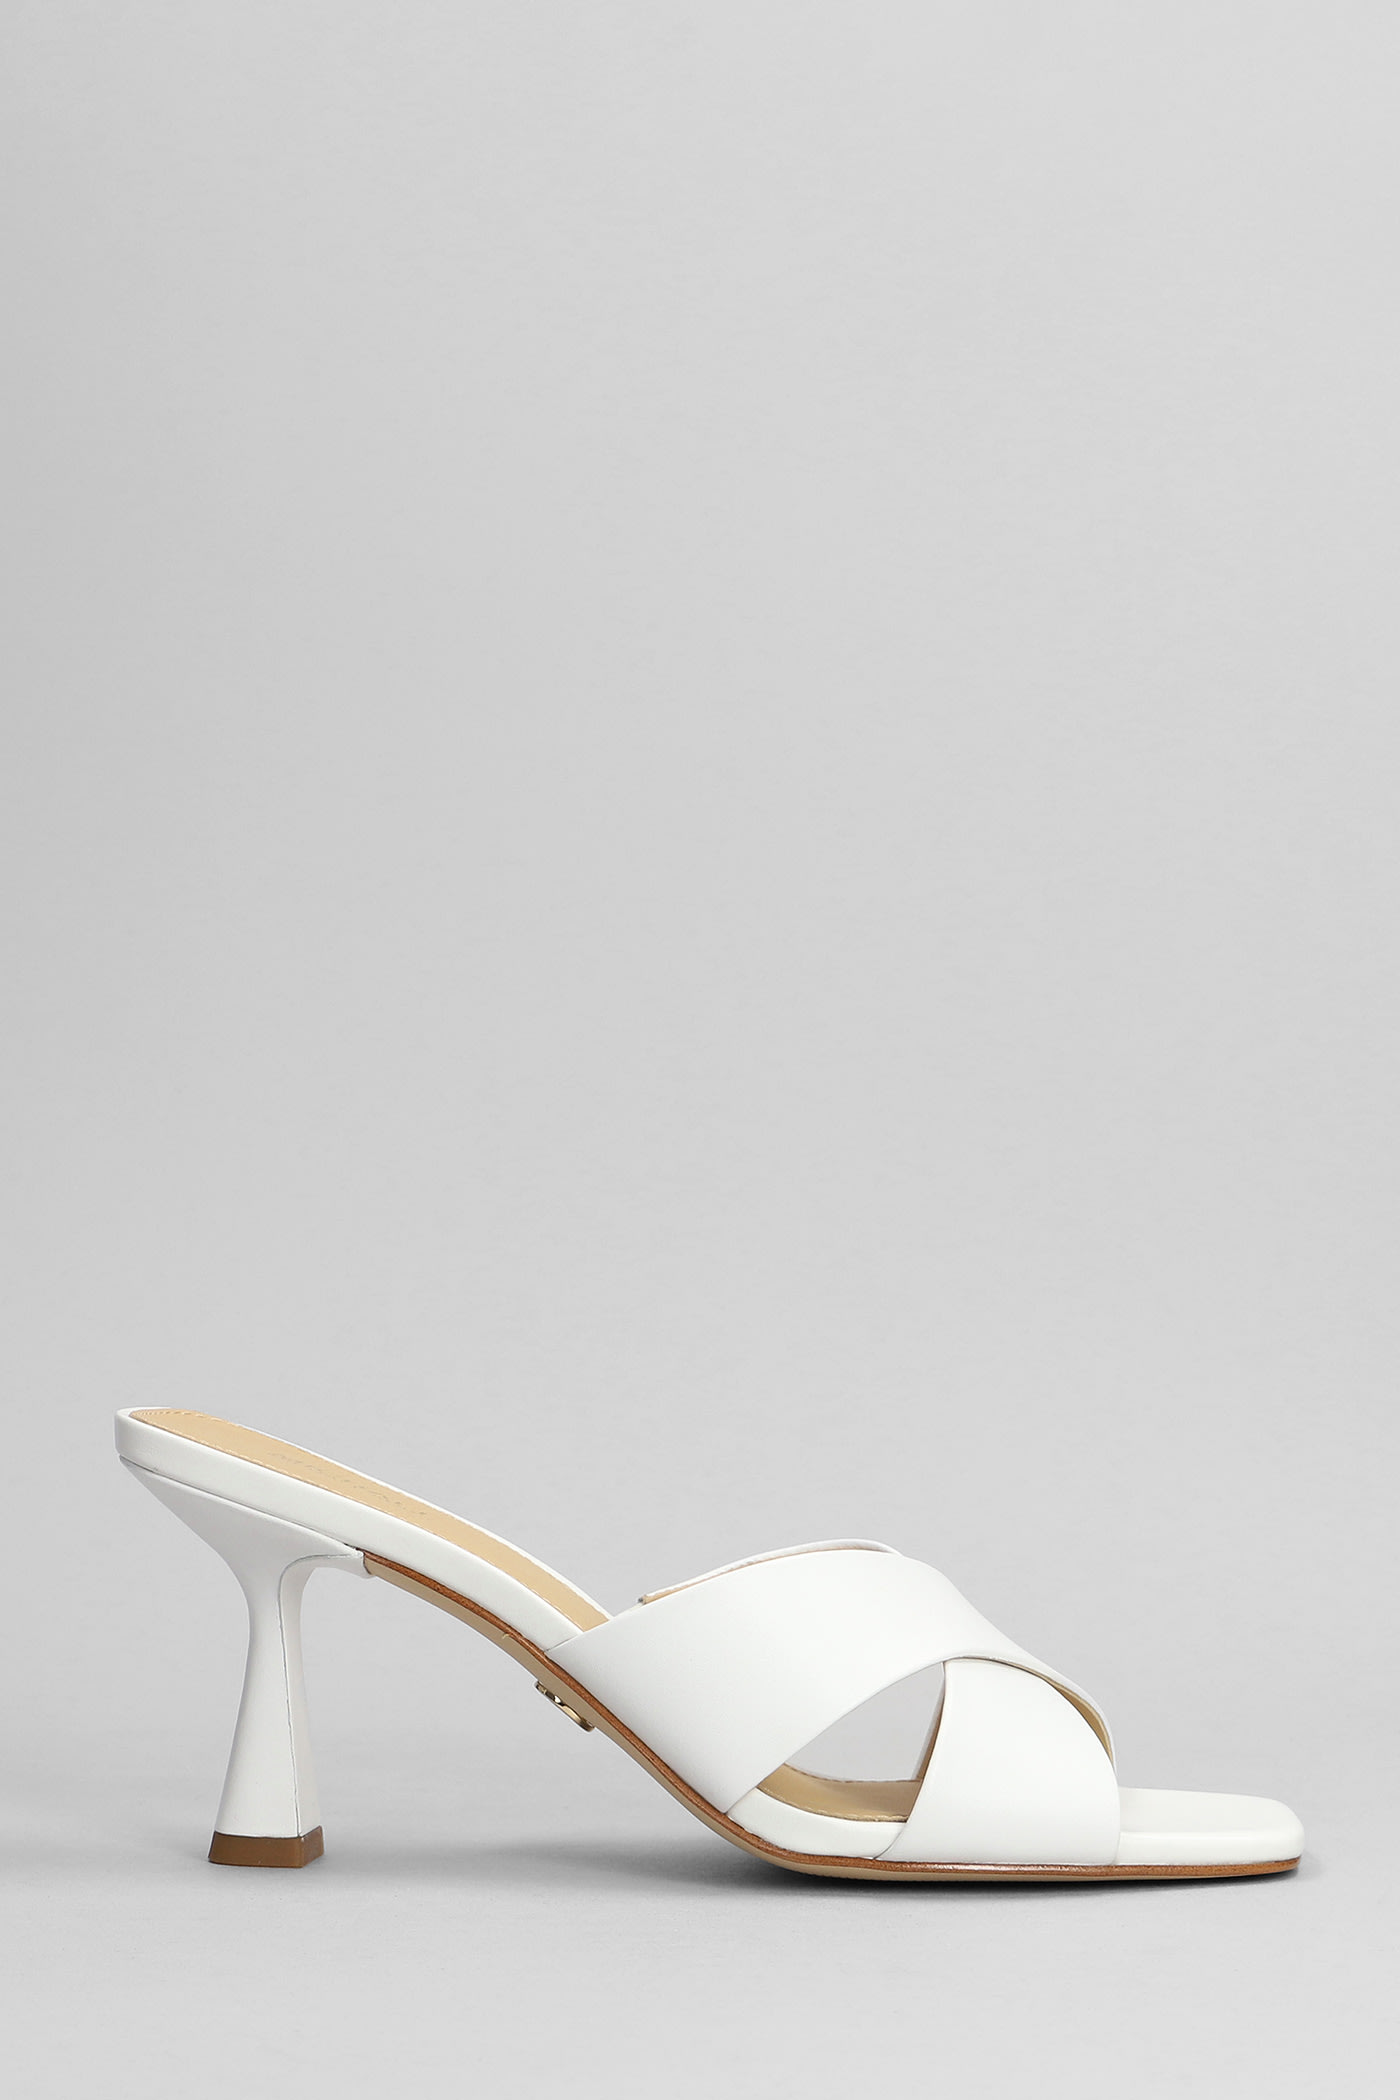 Michael Kors Clara Mule Sandals In White Leather